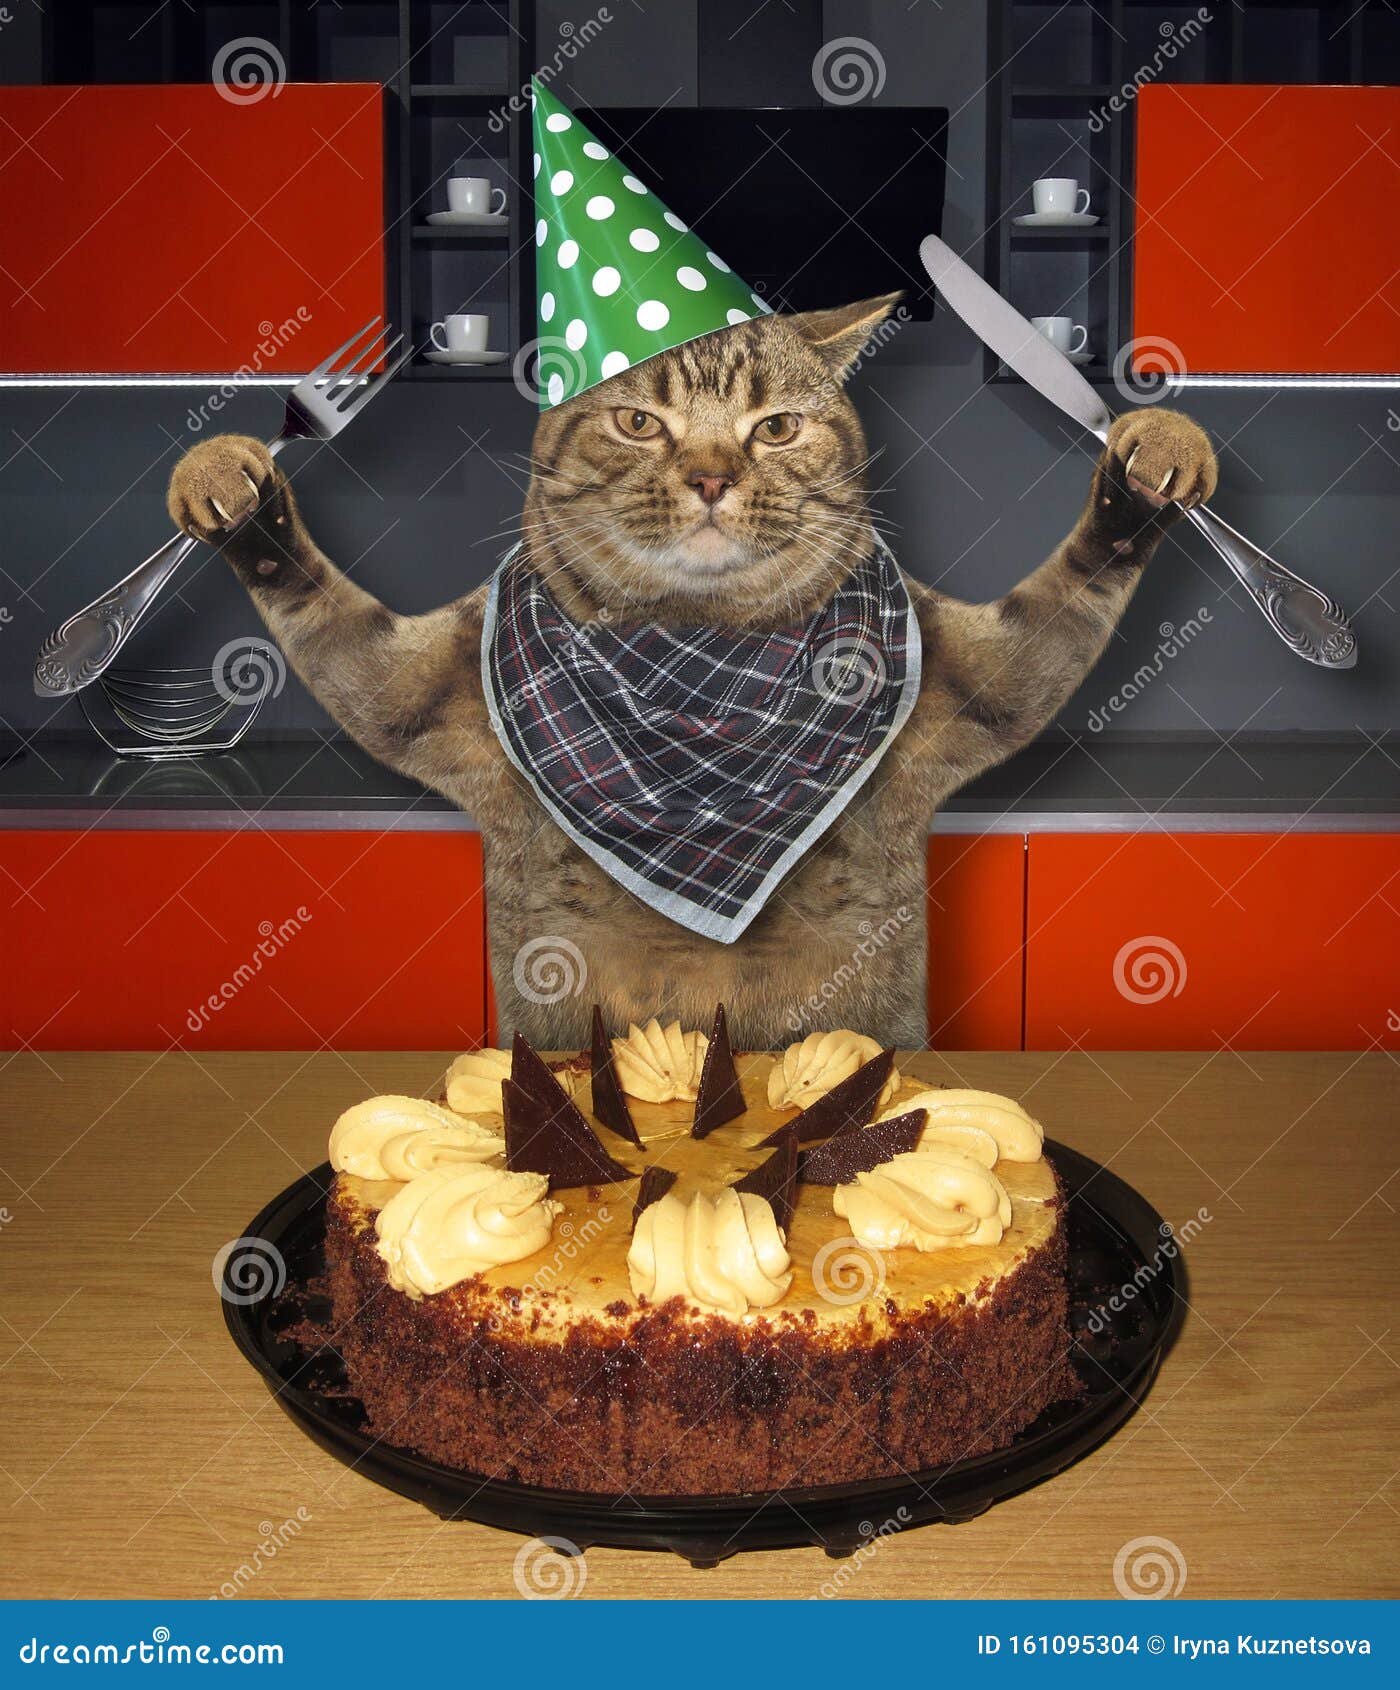 Cat Eating Birthday Cake In Kitchen Stock Photo Image of home, knife